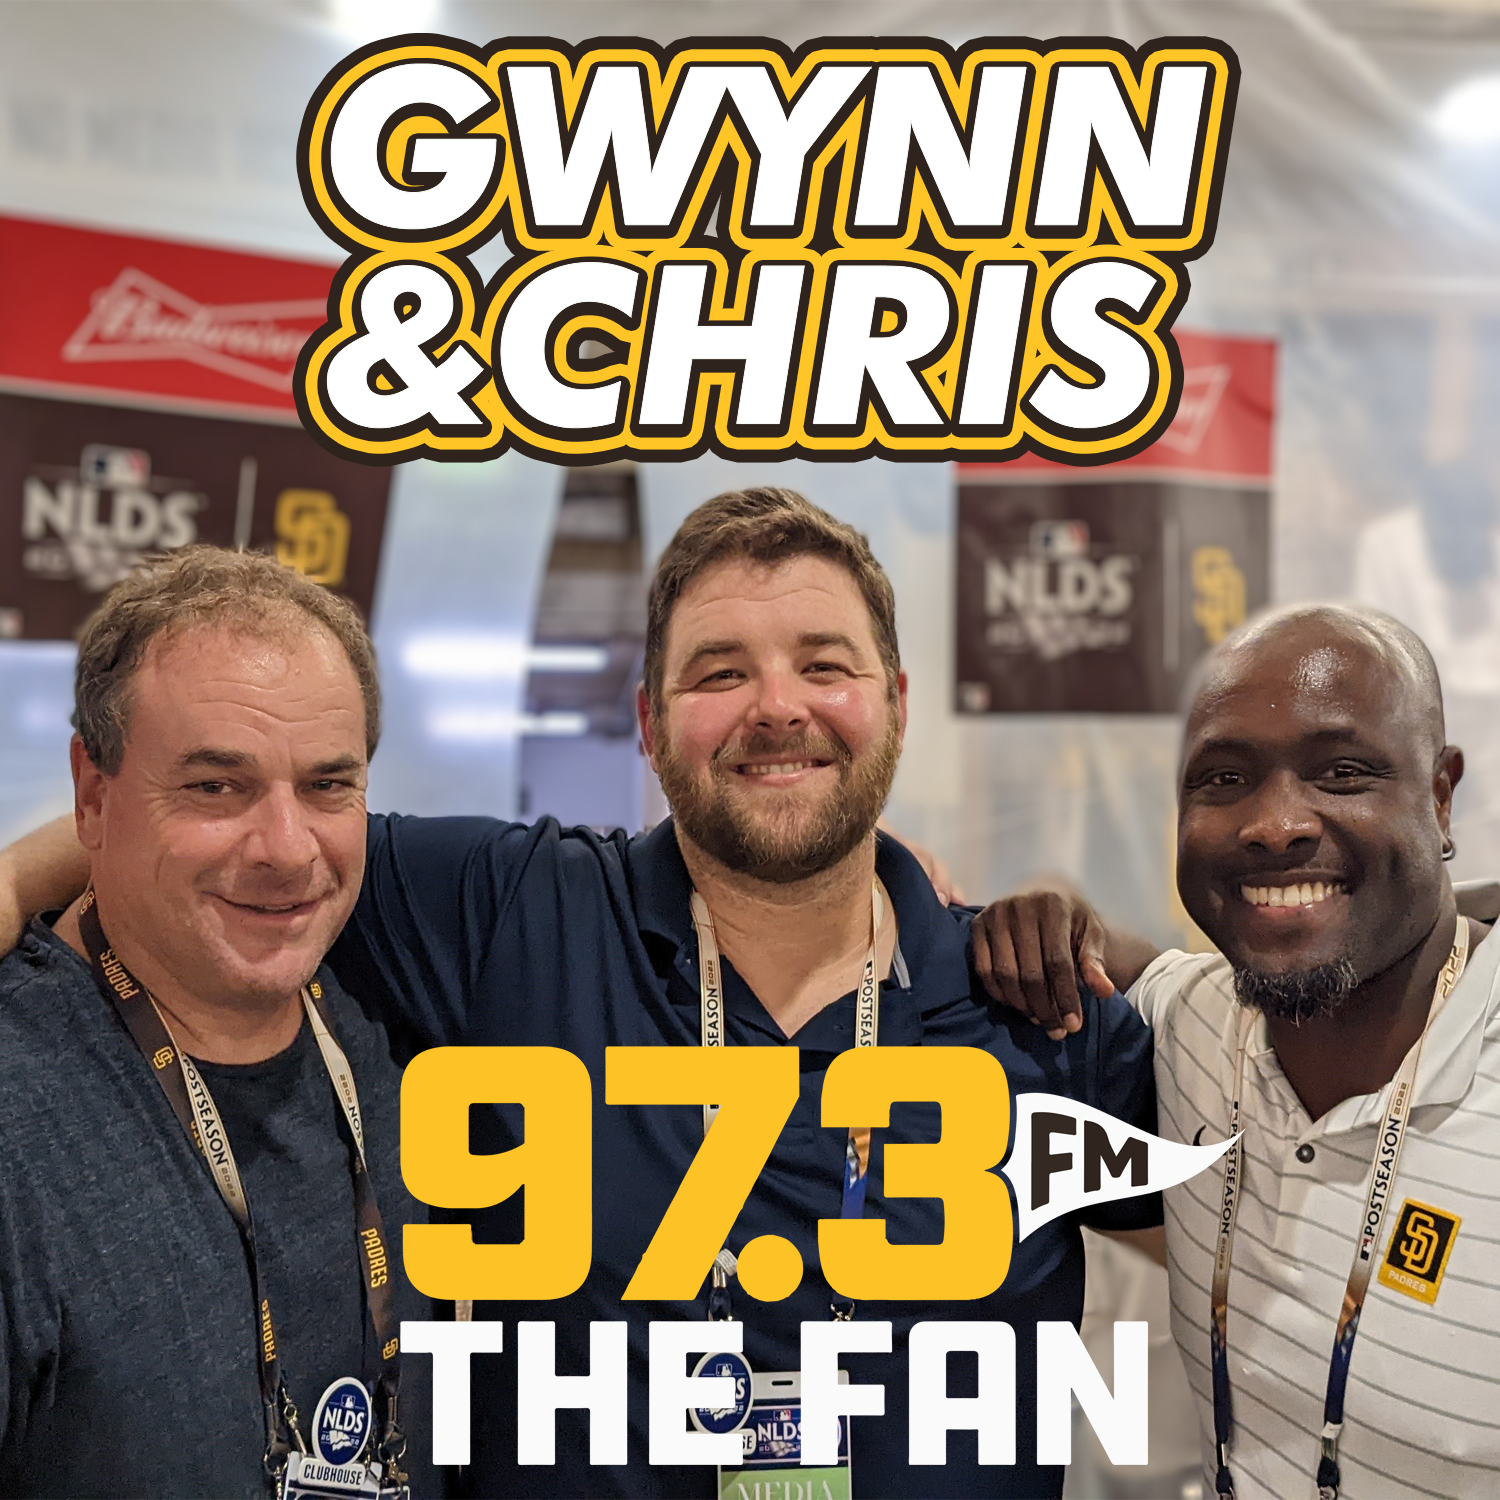 11.1.21 Gwynn & Chris Full Show - Back from Vacation and the guys reacting to Bob Melvin being hired as the Padres manager